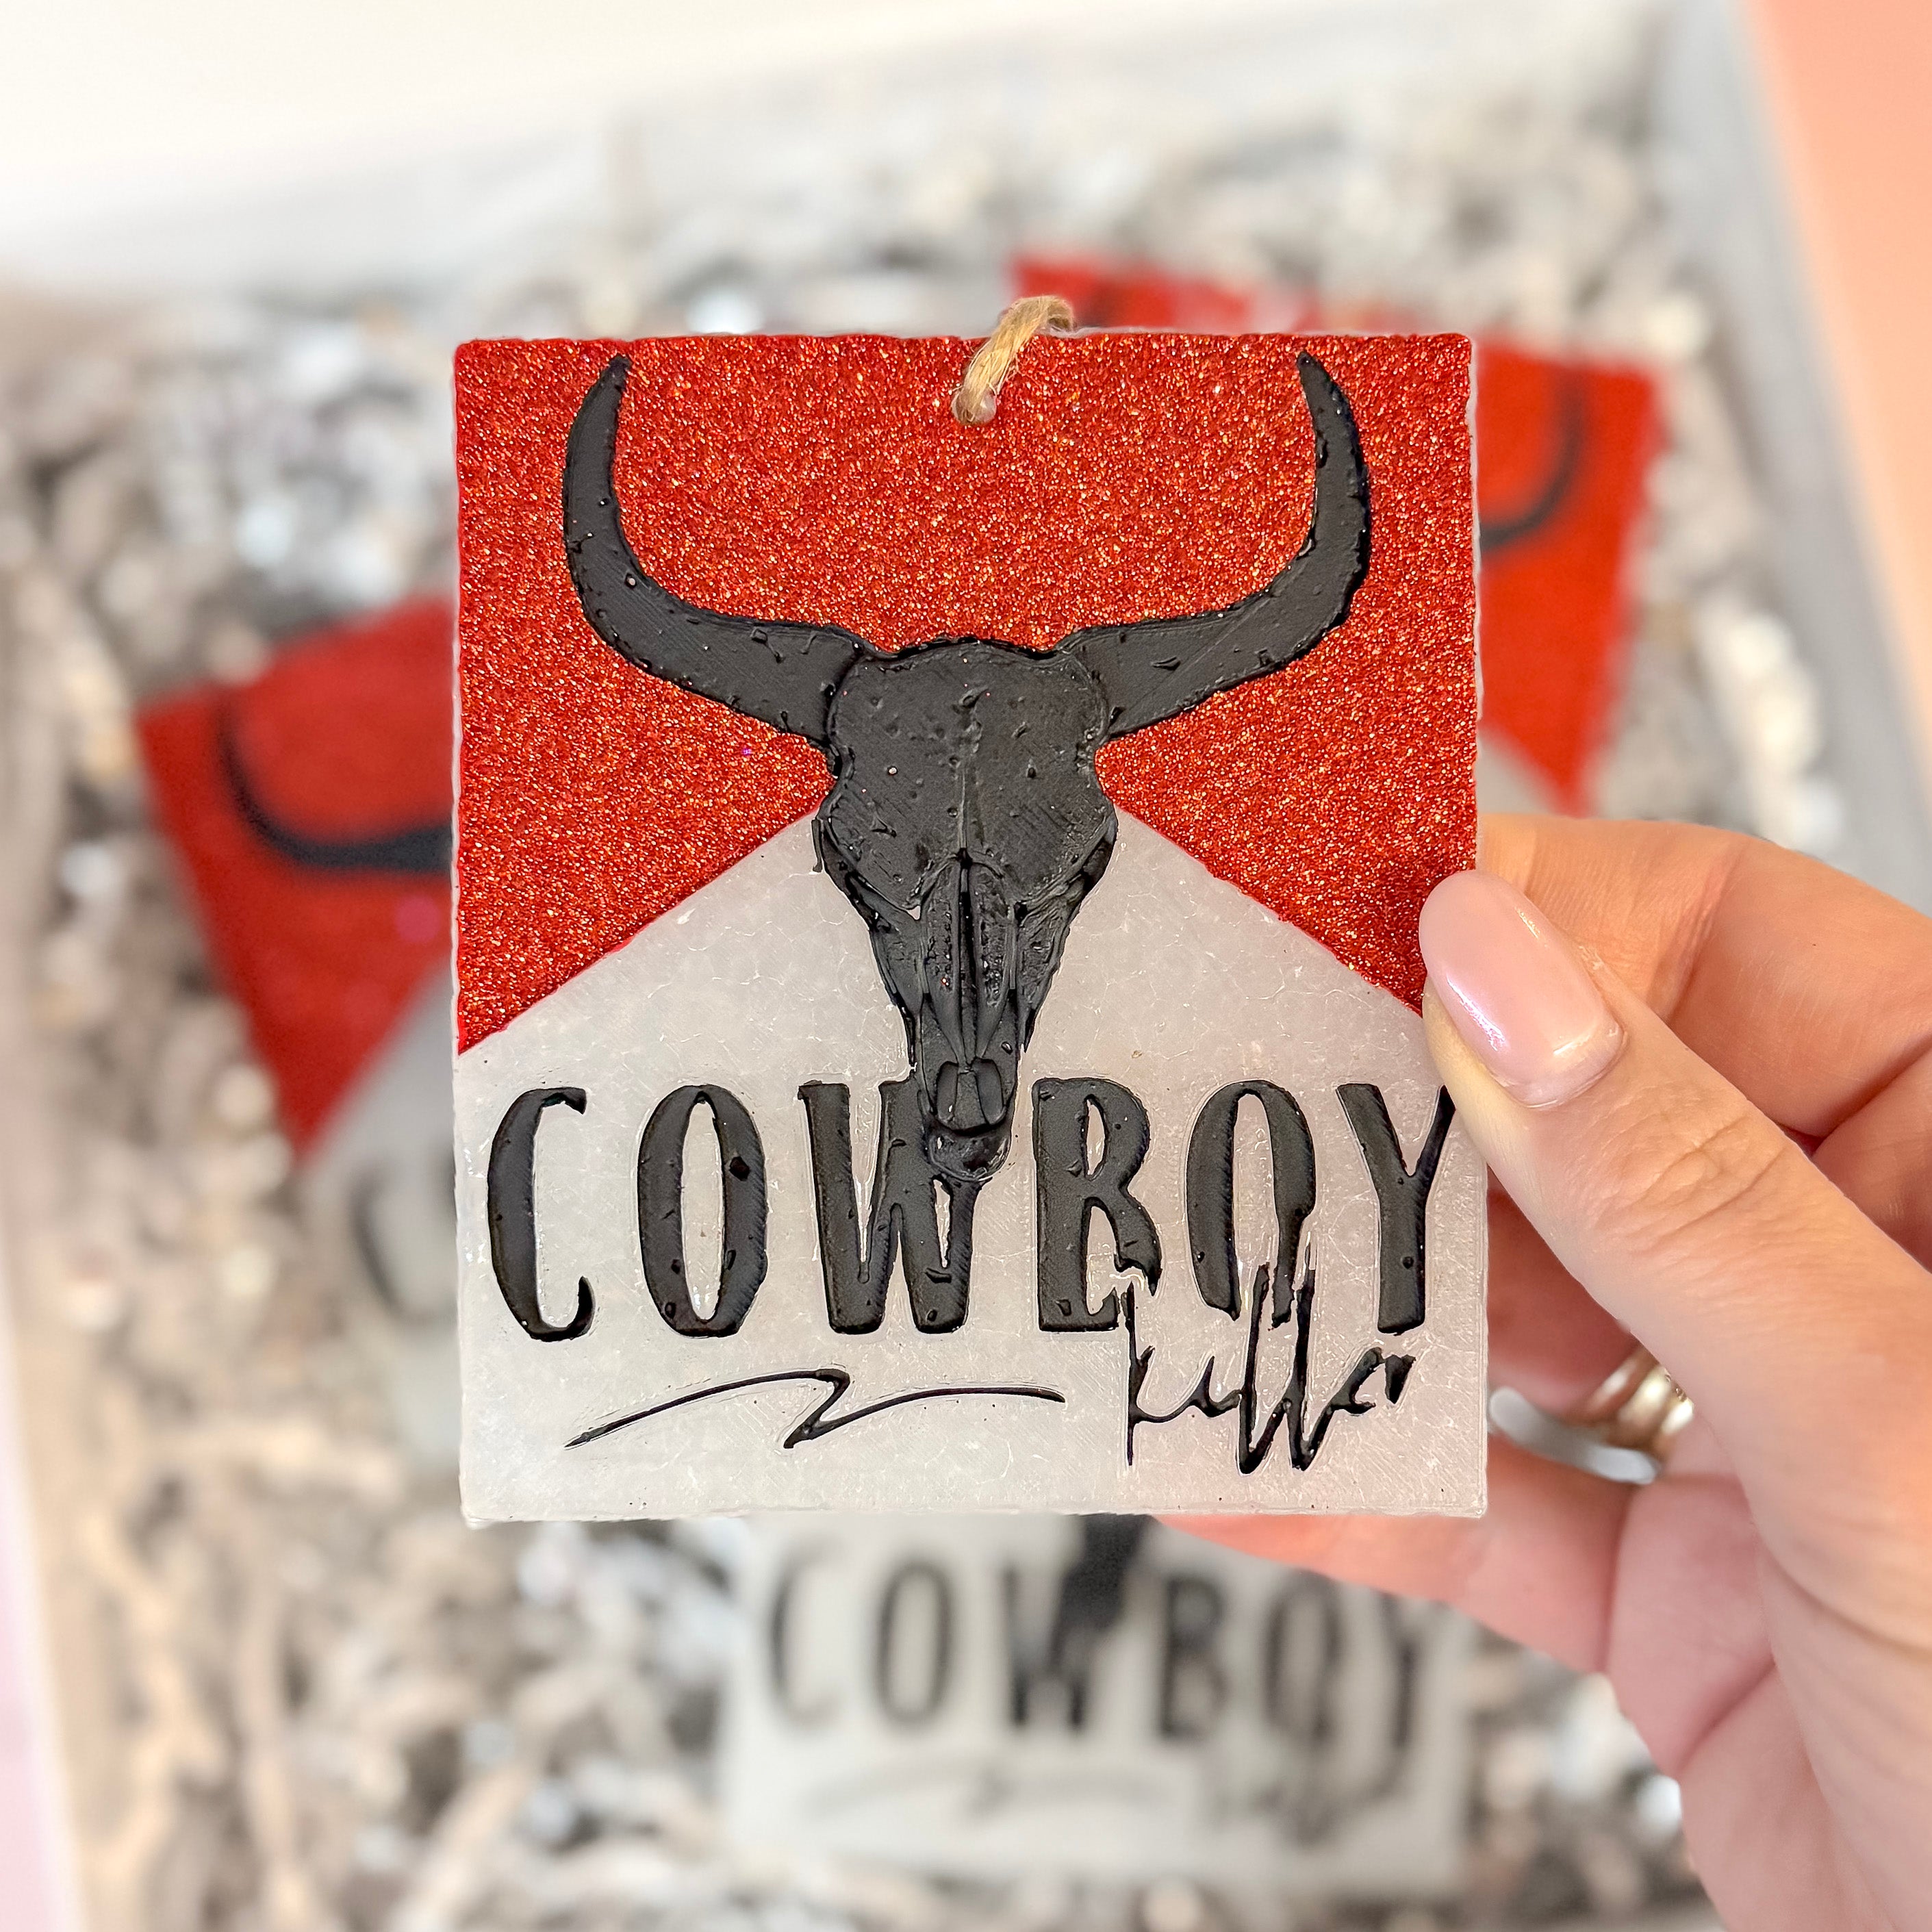 Cowboy Killer Car Freshie in Various Scents - Giddy Up Glamour Boutique